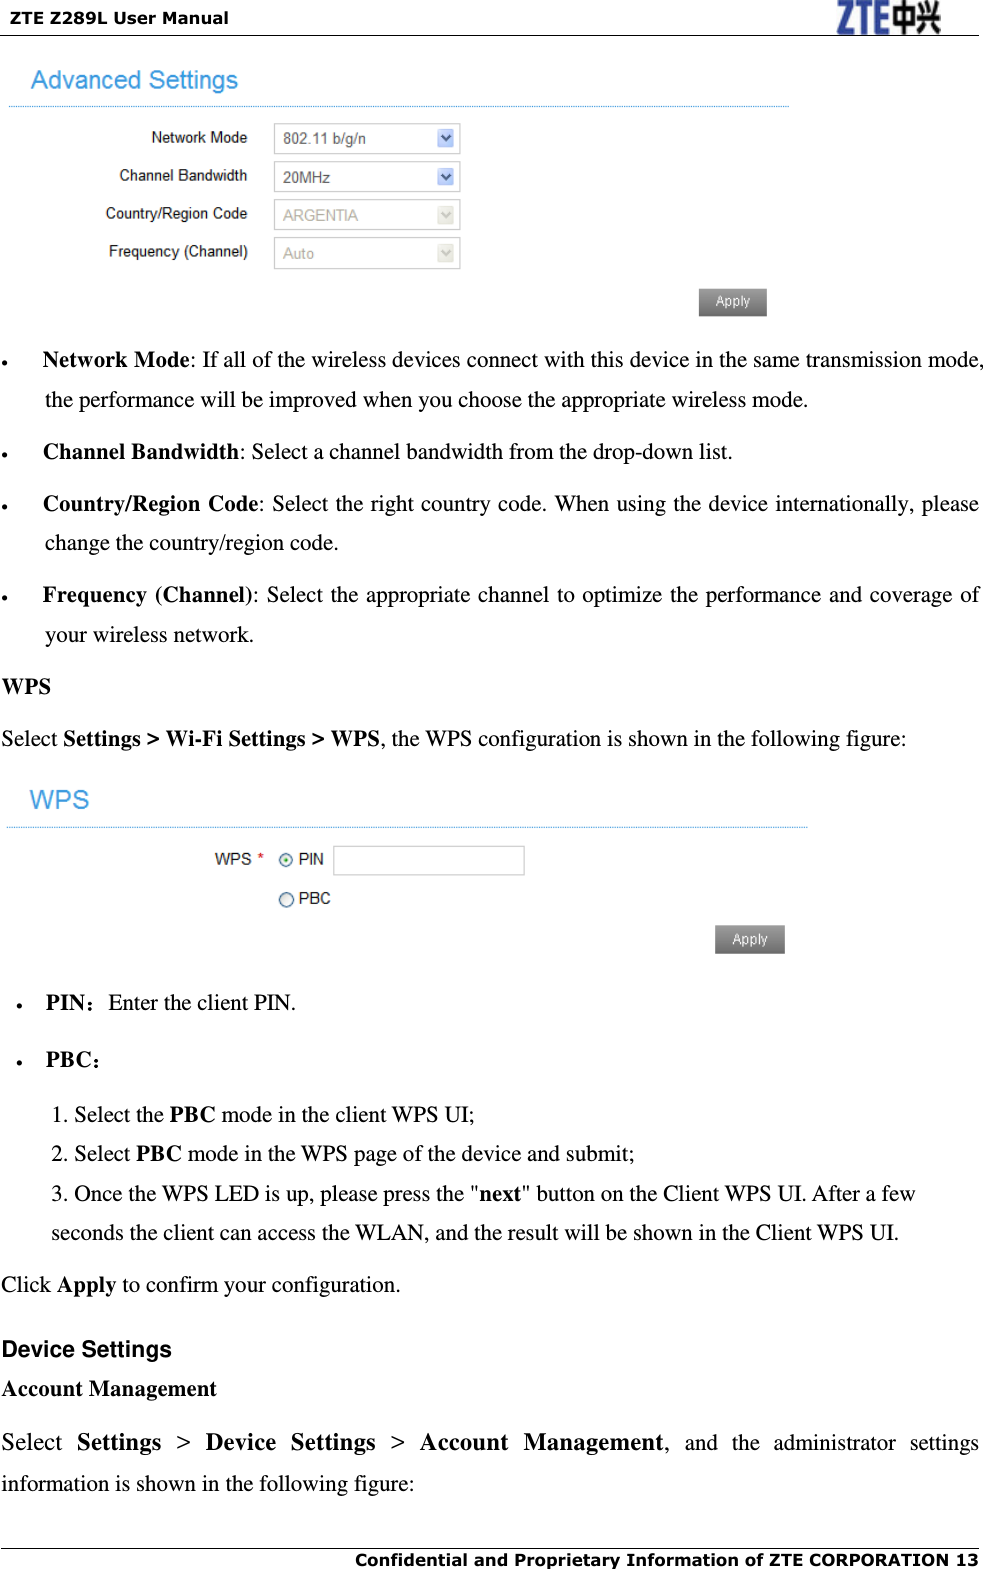   ZTE Z289L User Manual  Confidential and Proprietary Information of ZTE CORPORATION 13       Network Mode: If all of the wireless devices connect with this device in the same transmission mode, the performance will be improved when you choose the appropriate wireless mode.    Channel Bandwidth: Select a channel bandwidth from the drop-down list.    Country/Region Code: Select the right country code. When using the device internationally, please change the country/region code.    Frequency (Channel): Select the appropriate channel to optimize the performance and coverage of your wireless network. WPS Select Settings &gt; Wi-Fi Settings &gt; WPS, the WPS configuration is shown in the following figure:    PIN：Enter the client PIN.   PBC： 1. Select the PBC mode in the client WPS UI; 2. Select PBC mode in the WPS page of the device and submit;   3. Once the WPS LED is up, please press the &quot;next&quot; button on the Client WPS UI. After a few seconds the client can access the WLAN, and the result will be shown in the Client WPS UI. Click Apply to confirm your configuration. Device Settings Account Management Select  Settings &gt;  Device  Settings &gt;  Account  Management,  and  the  administrator  settings information is shown in the following figure: 